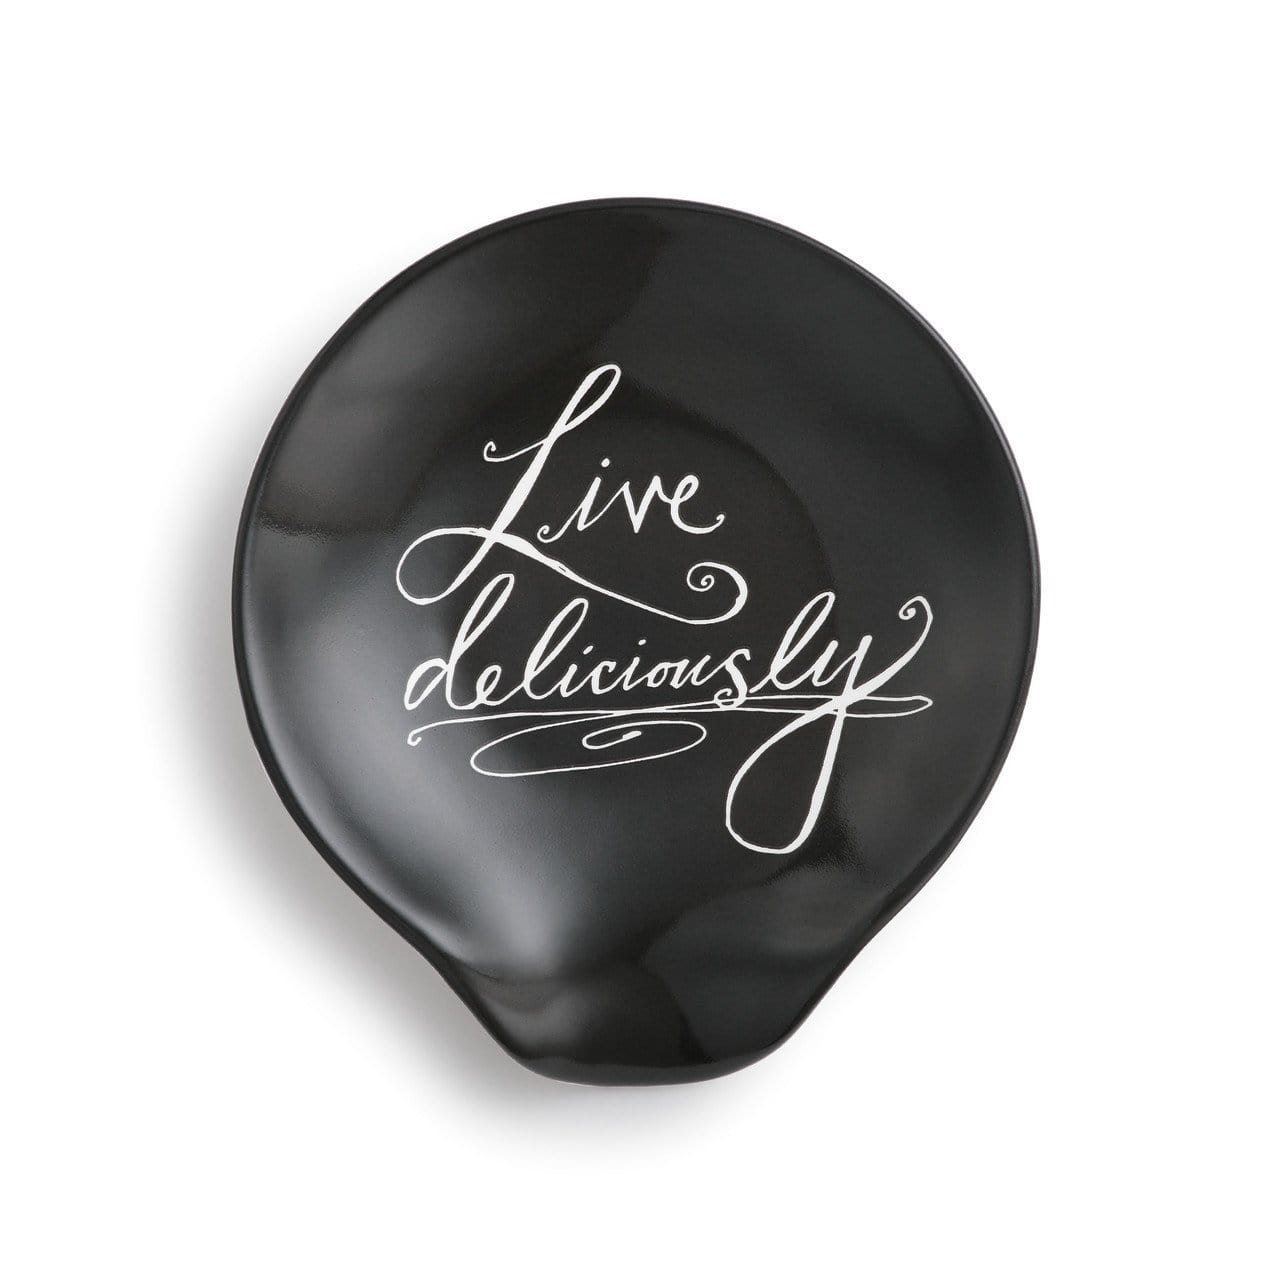 Live Deliciously Appetizer Bowl with Spoon or Spoon Rest - The Pink Pigs, Animal Lover's Boutique